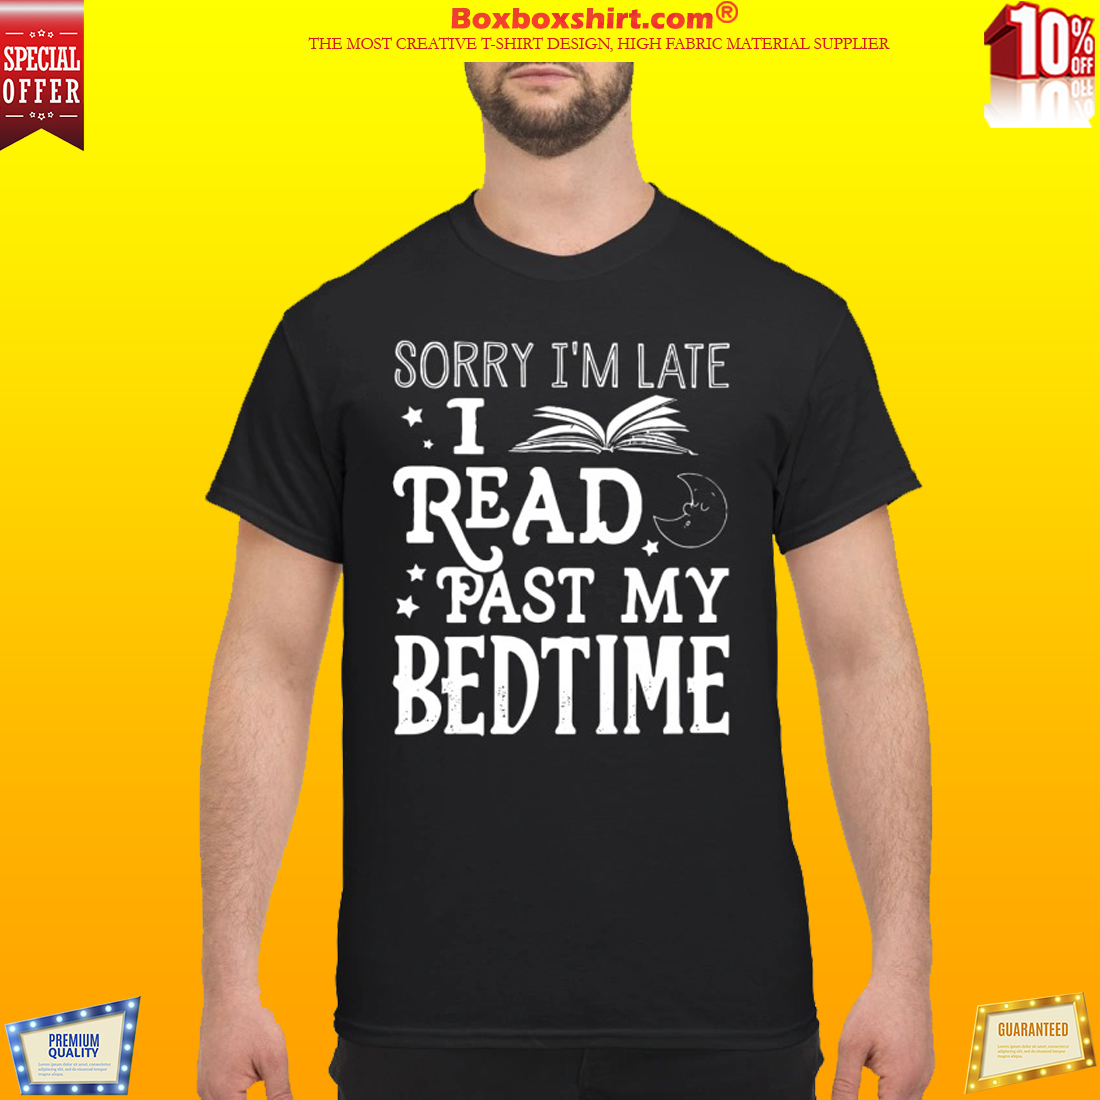 Sorry I'm late I read past my bedtime classic shirt